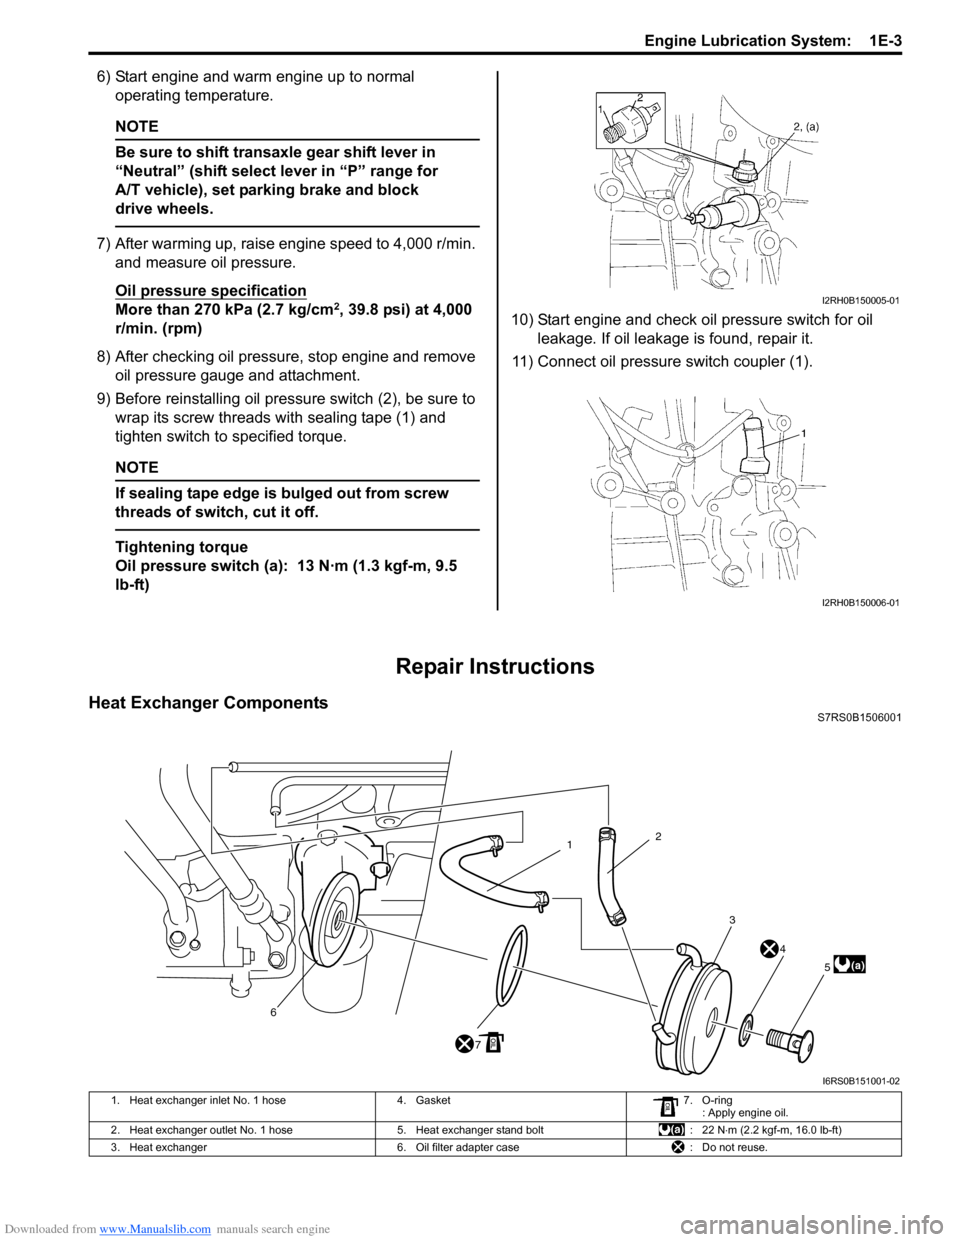 SUZUKI SWIFT 2006 2.G Service Workshop Manual Downloaded from www.Manualslib.com manuals search engine Engine Lubrication System:  1E-3
6) Start engine and warm engine up to normal operating temperature.
NOTE
Be sure to shift transaxle gear shift